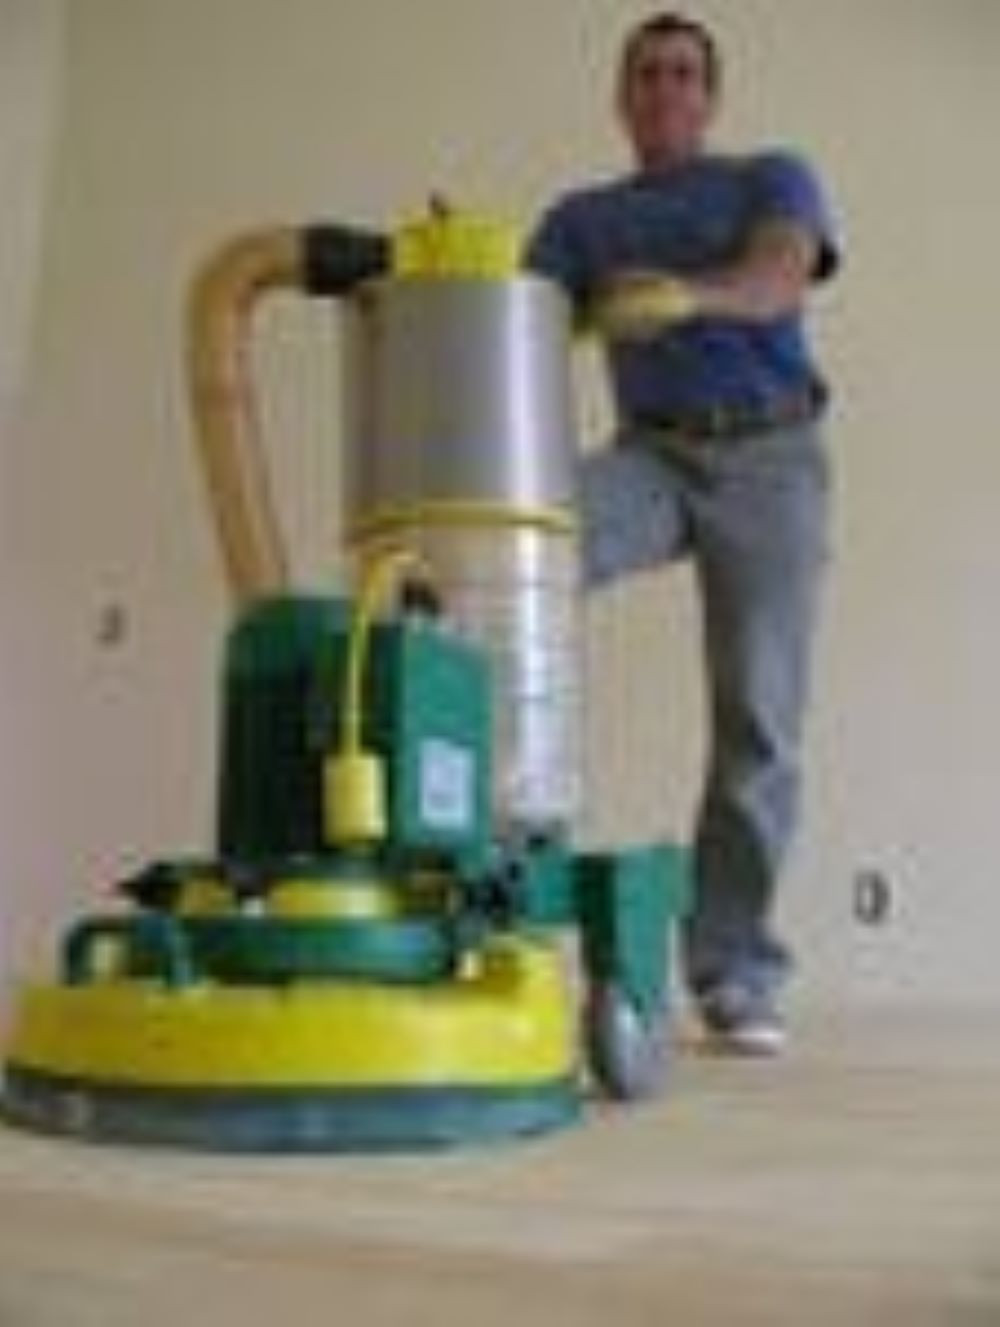 Ted and his Trio fine sanding machine